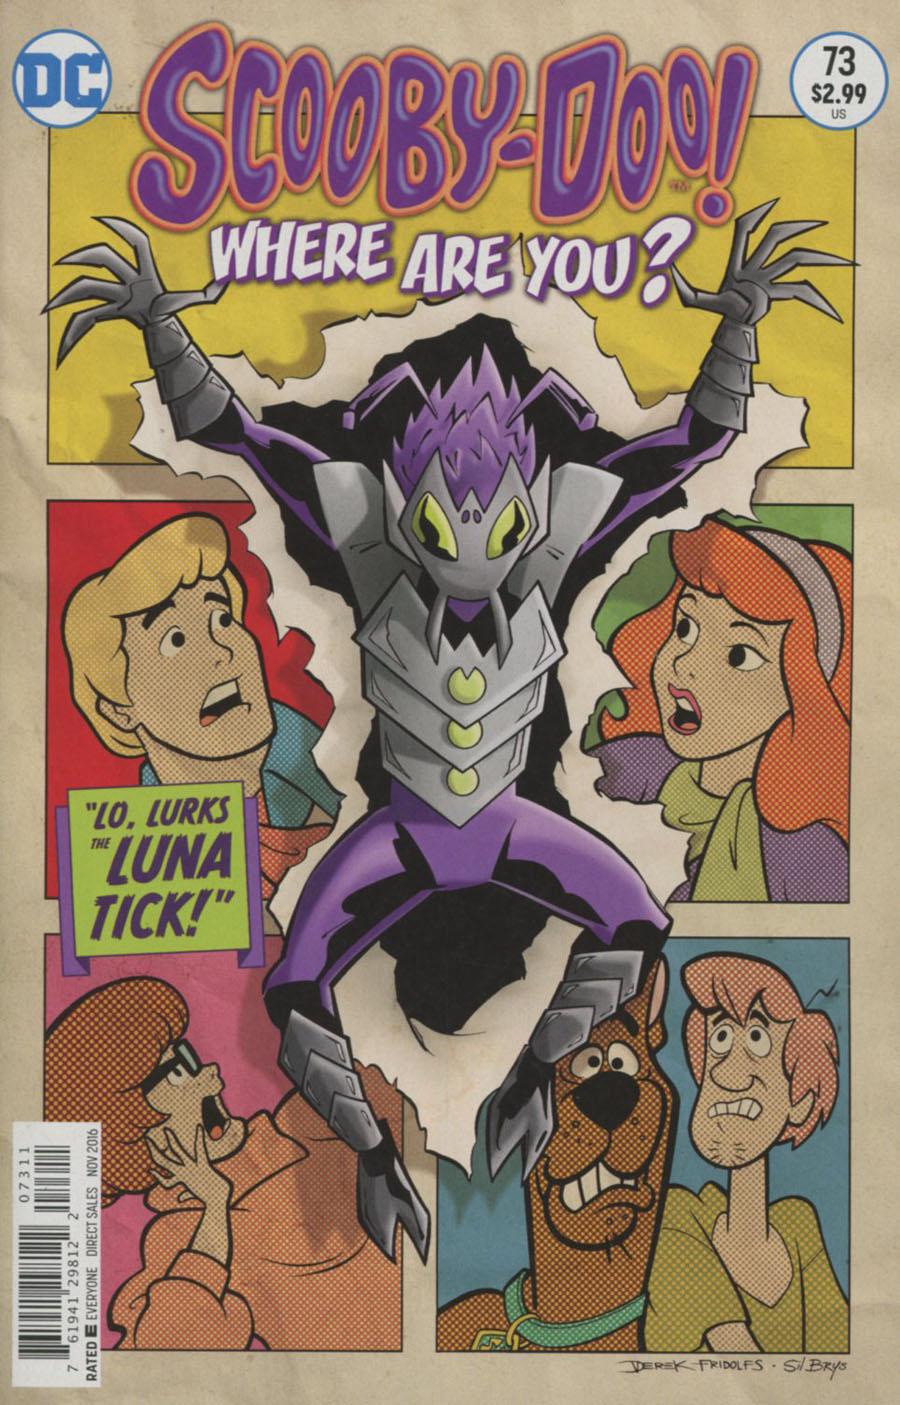 Scooby-Doo Where Are You Vol. 1 #73